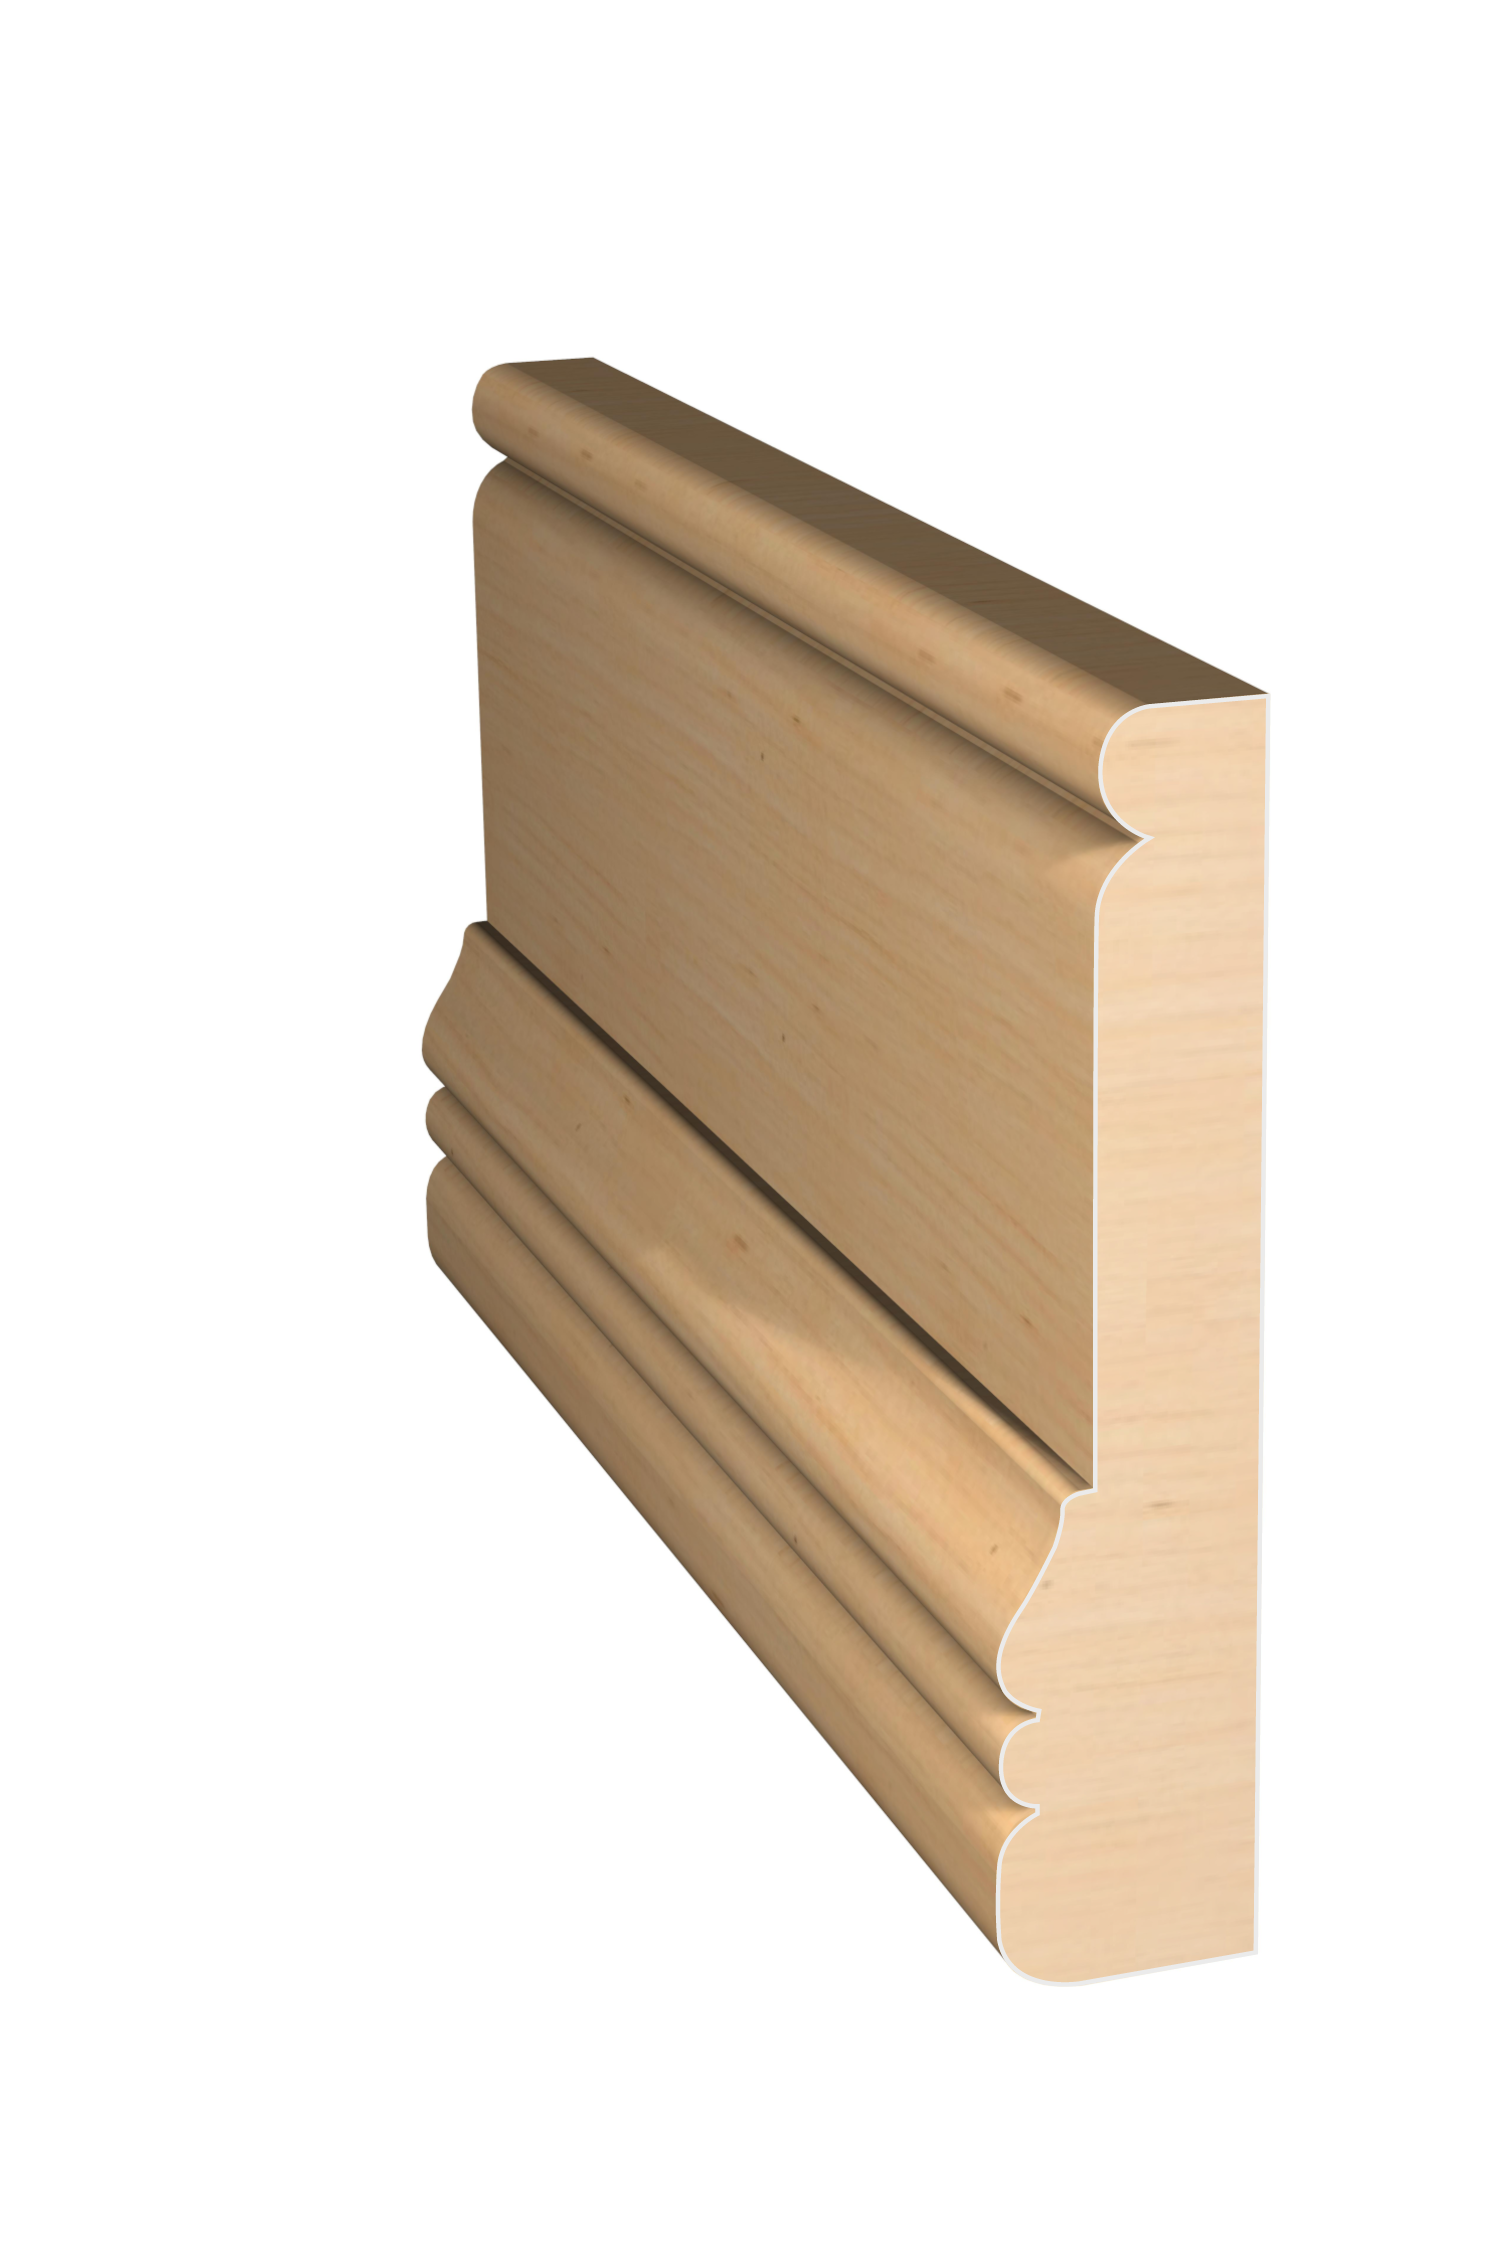 Three dimensional rendering of custom casing wood molding CAPL3126 made by Public Lumber Company in Detroit.